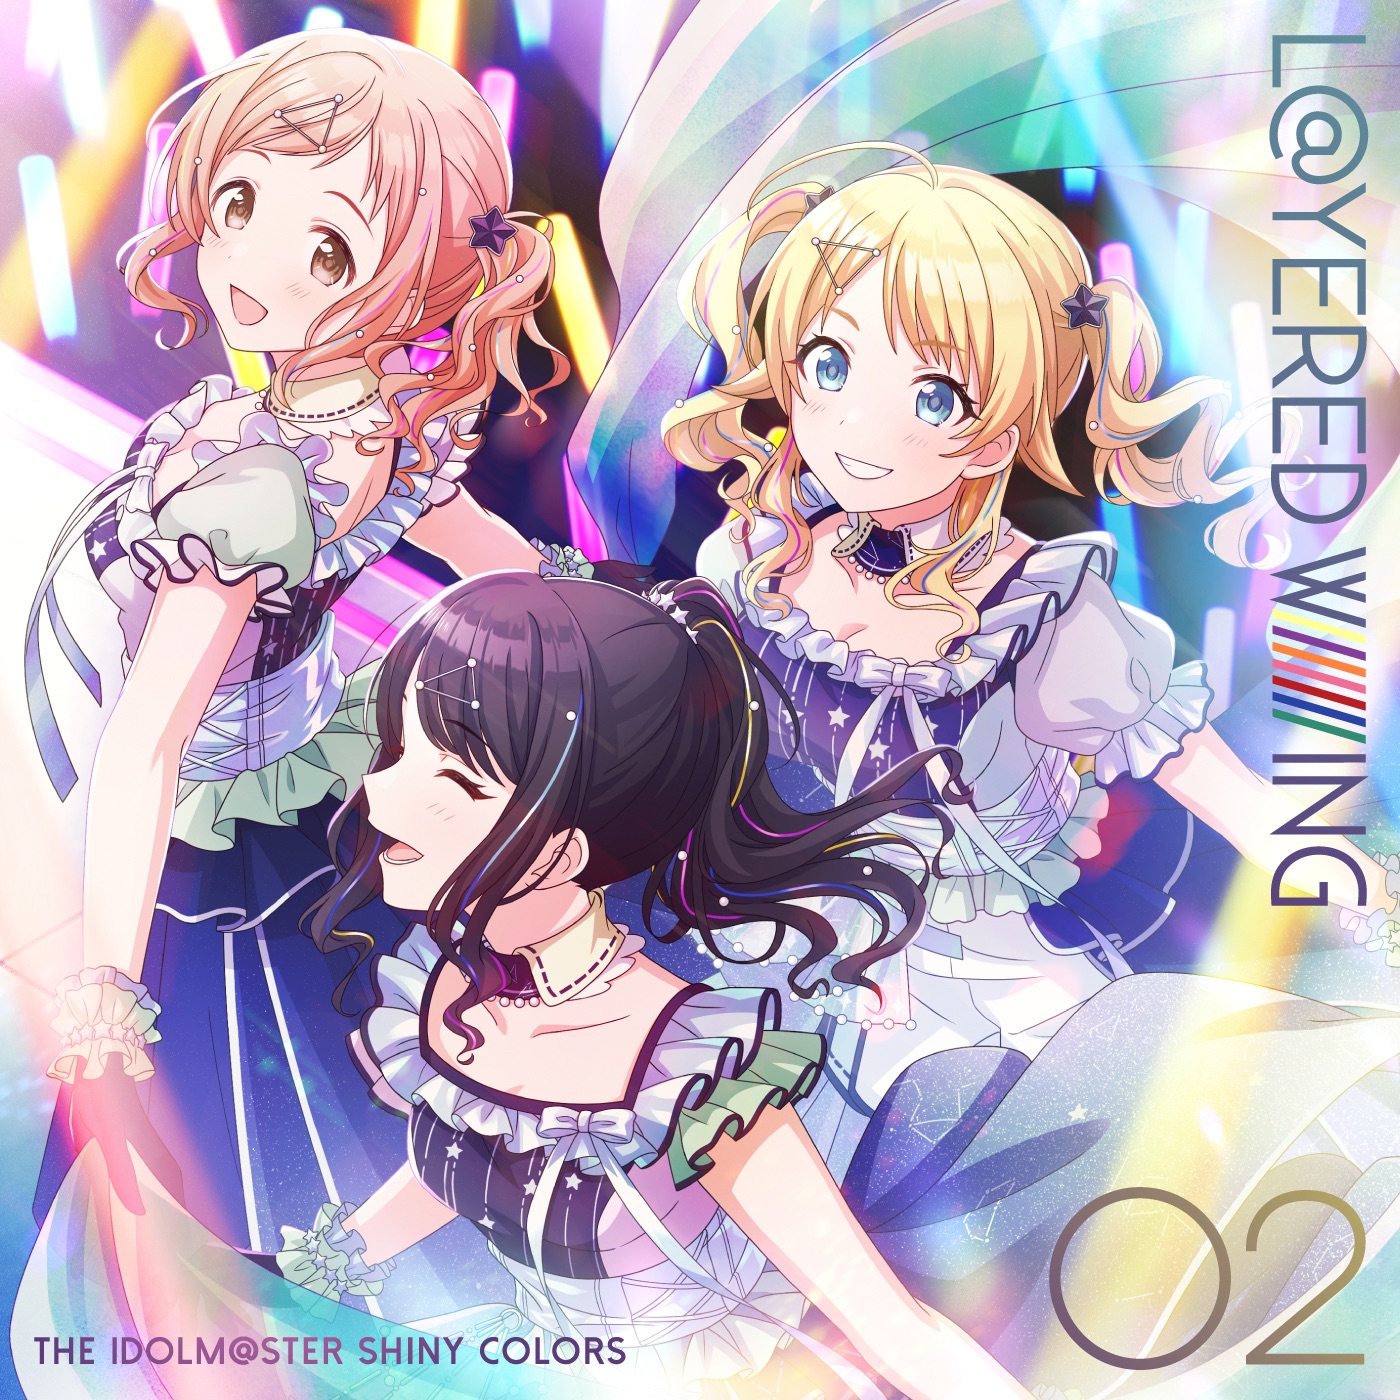 The Idolmster Shiny Colors Lyered Wing 02 Ep музыка из фильма